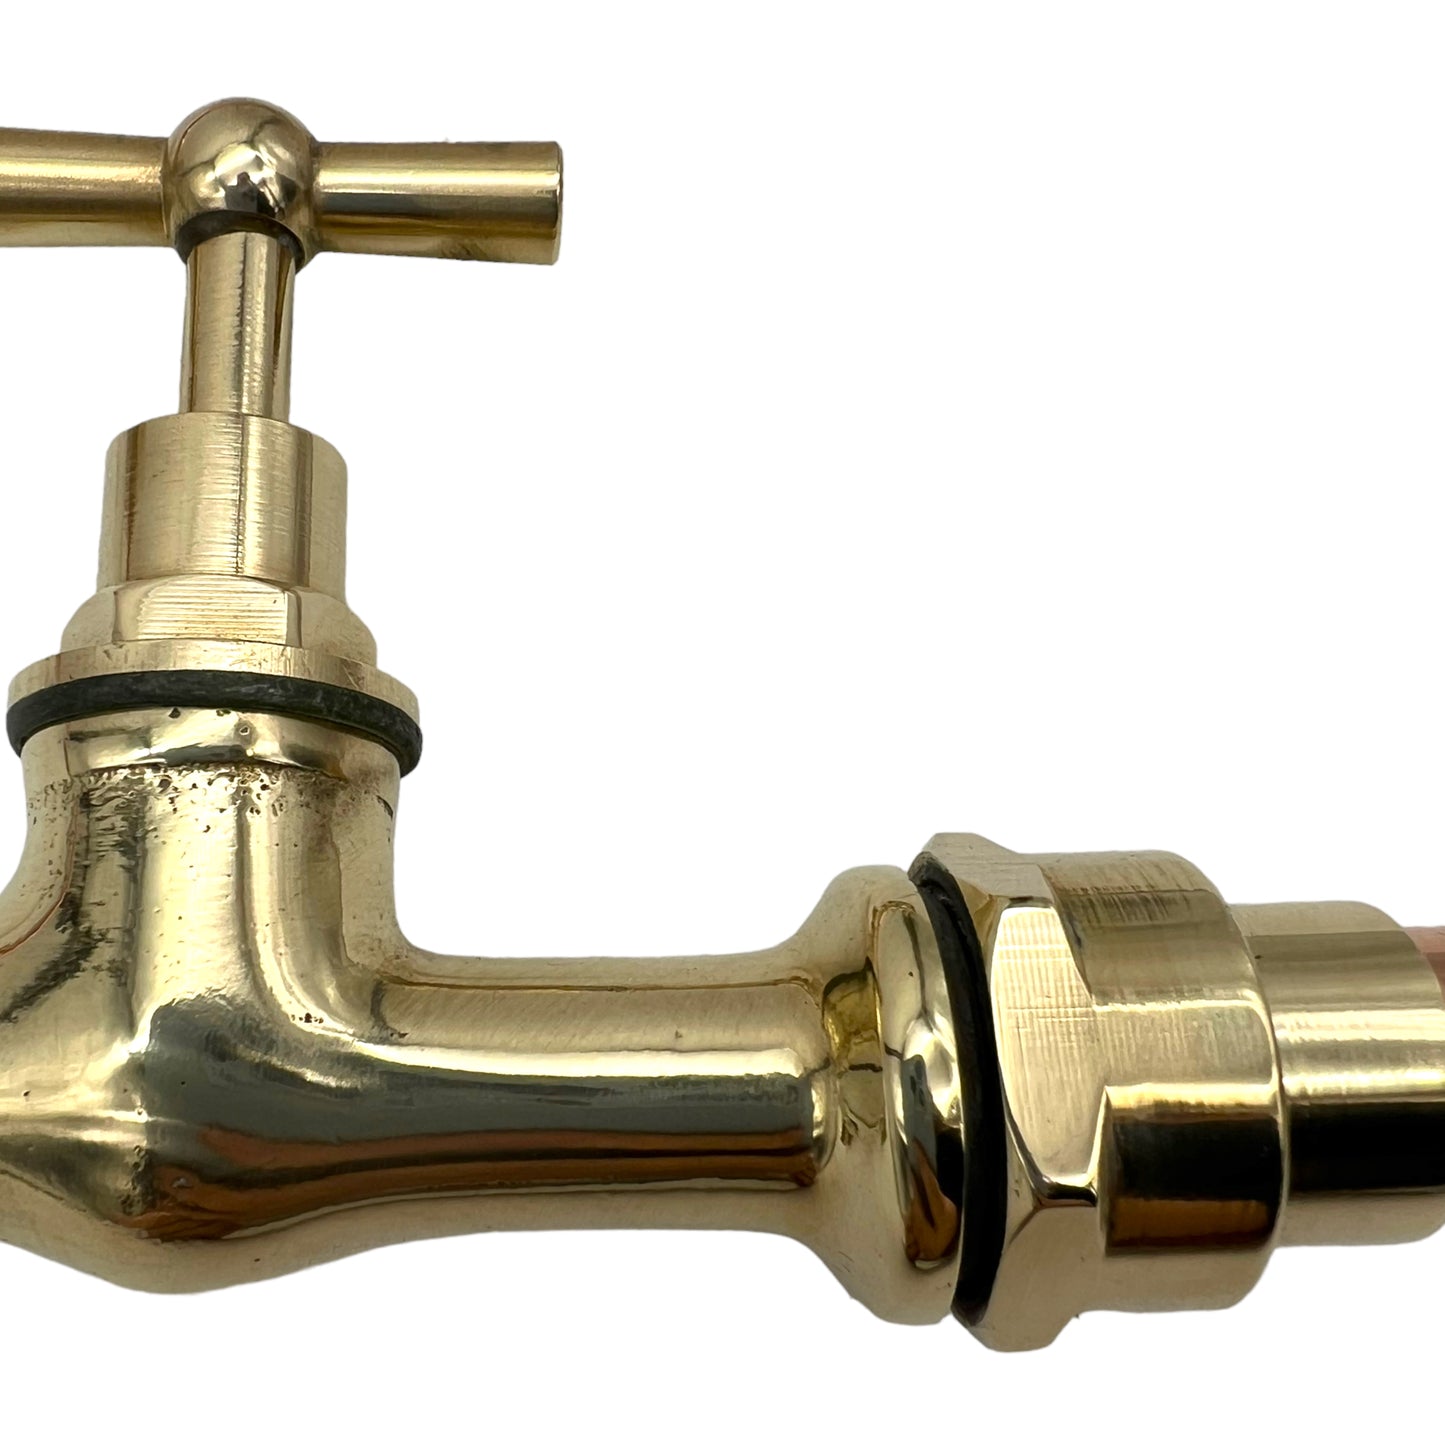 Vintage Style Brass Wall Mounted Taps, Vintage Style Brass and Copper Wall Taps (T17)